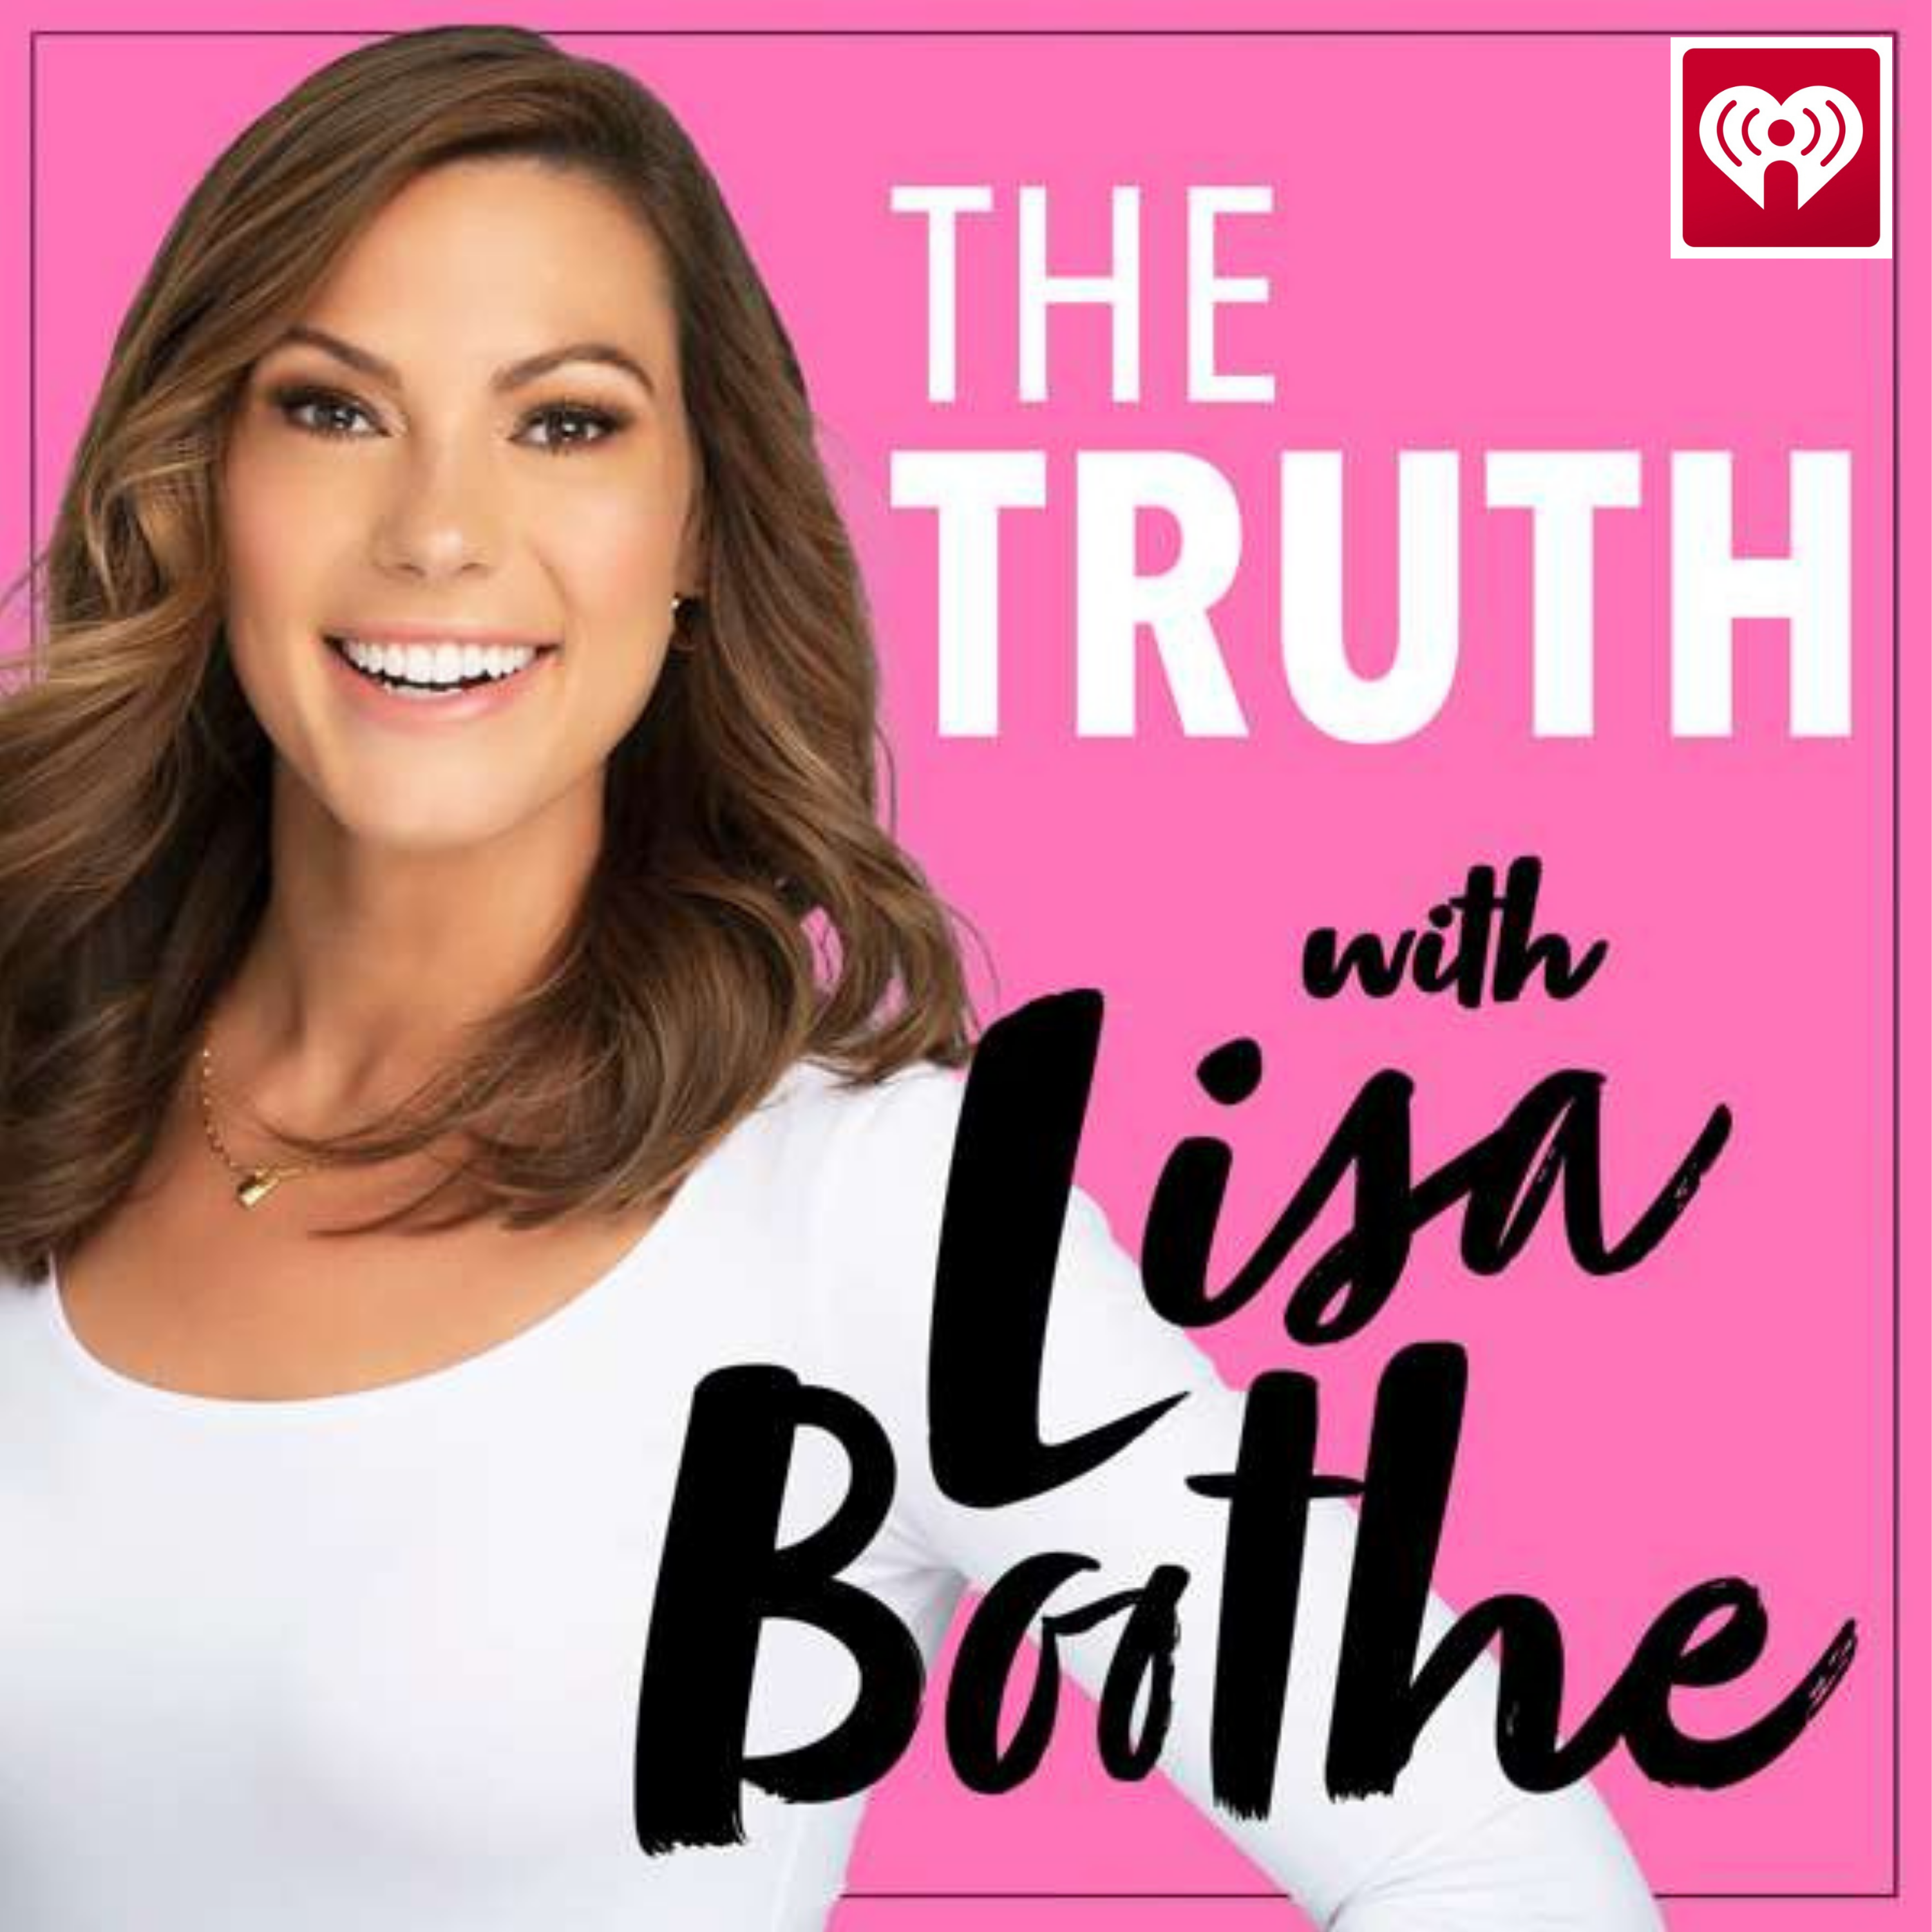 The Truth with Lisa Boothe: An Interview with Kyle Rittenhouse